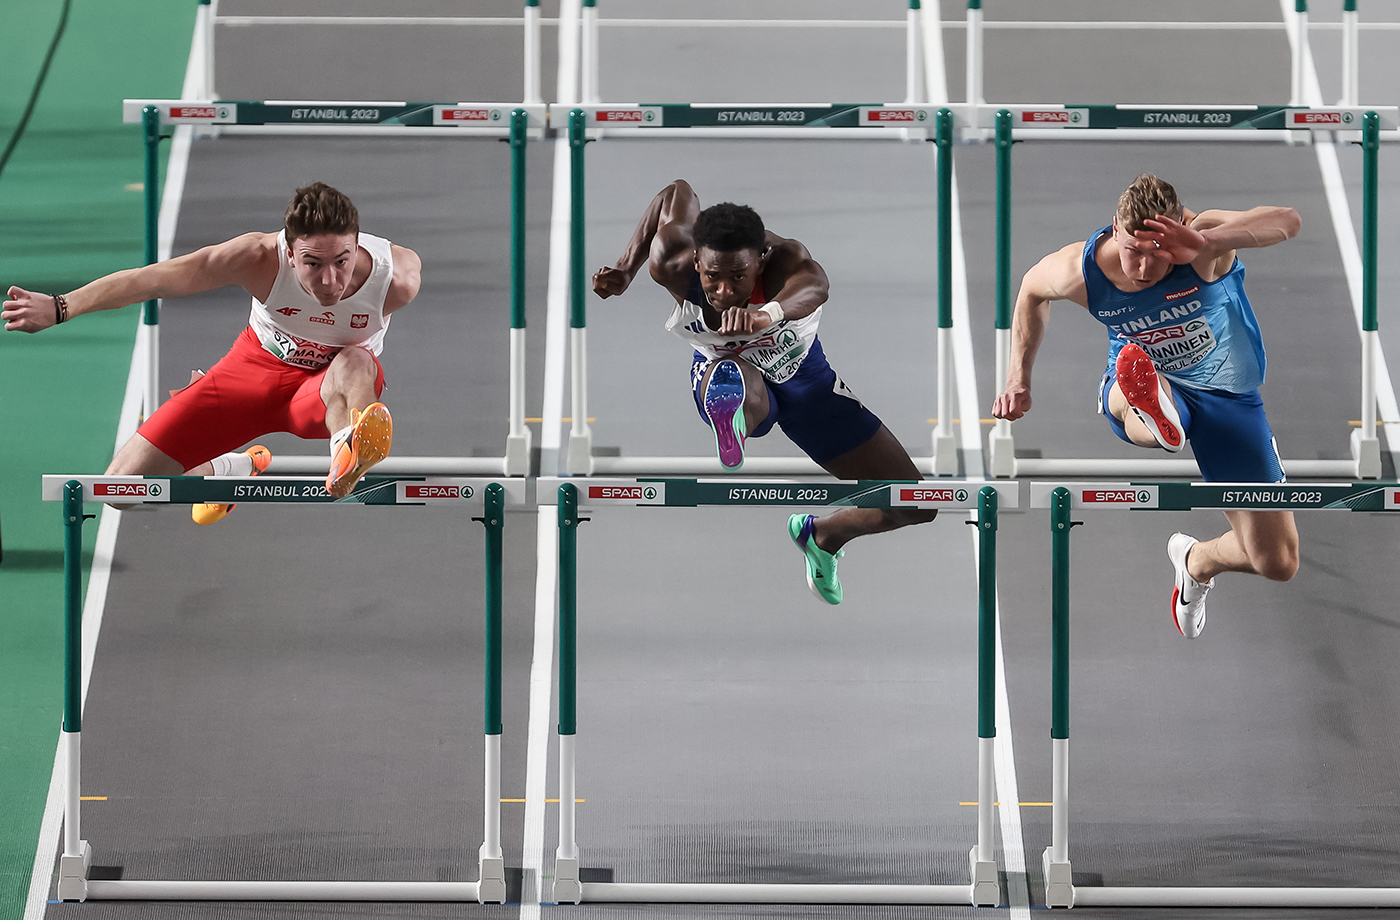 Jakub Szymanski of Poland (L), Just Kwaou-Mathey of France (C) and Ilari Manninen of Finland (R) in action during a 60m Hurdles Men Heat run at the European Athletics Indoor Championships in Istanbul, Turkey, 04 March 2023.